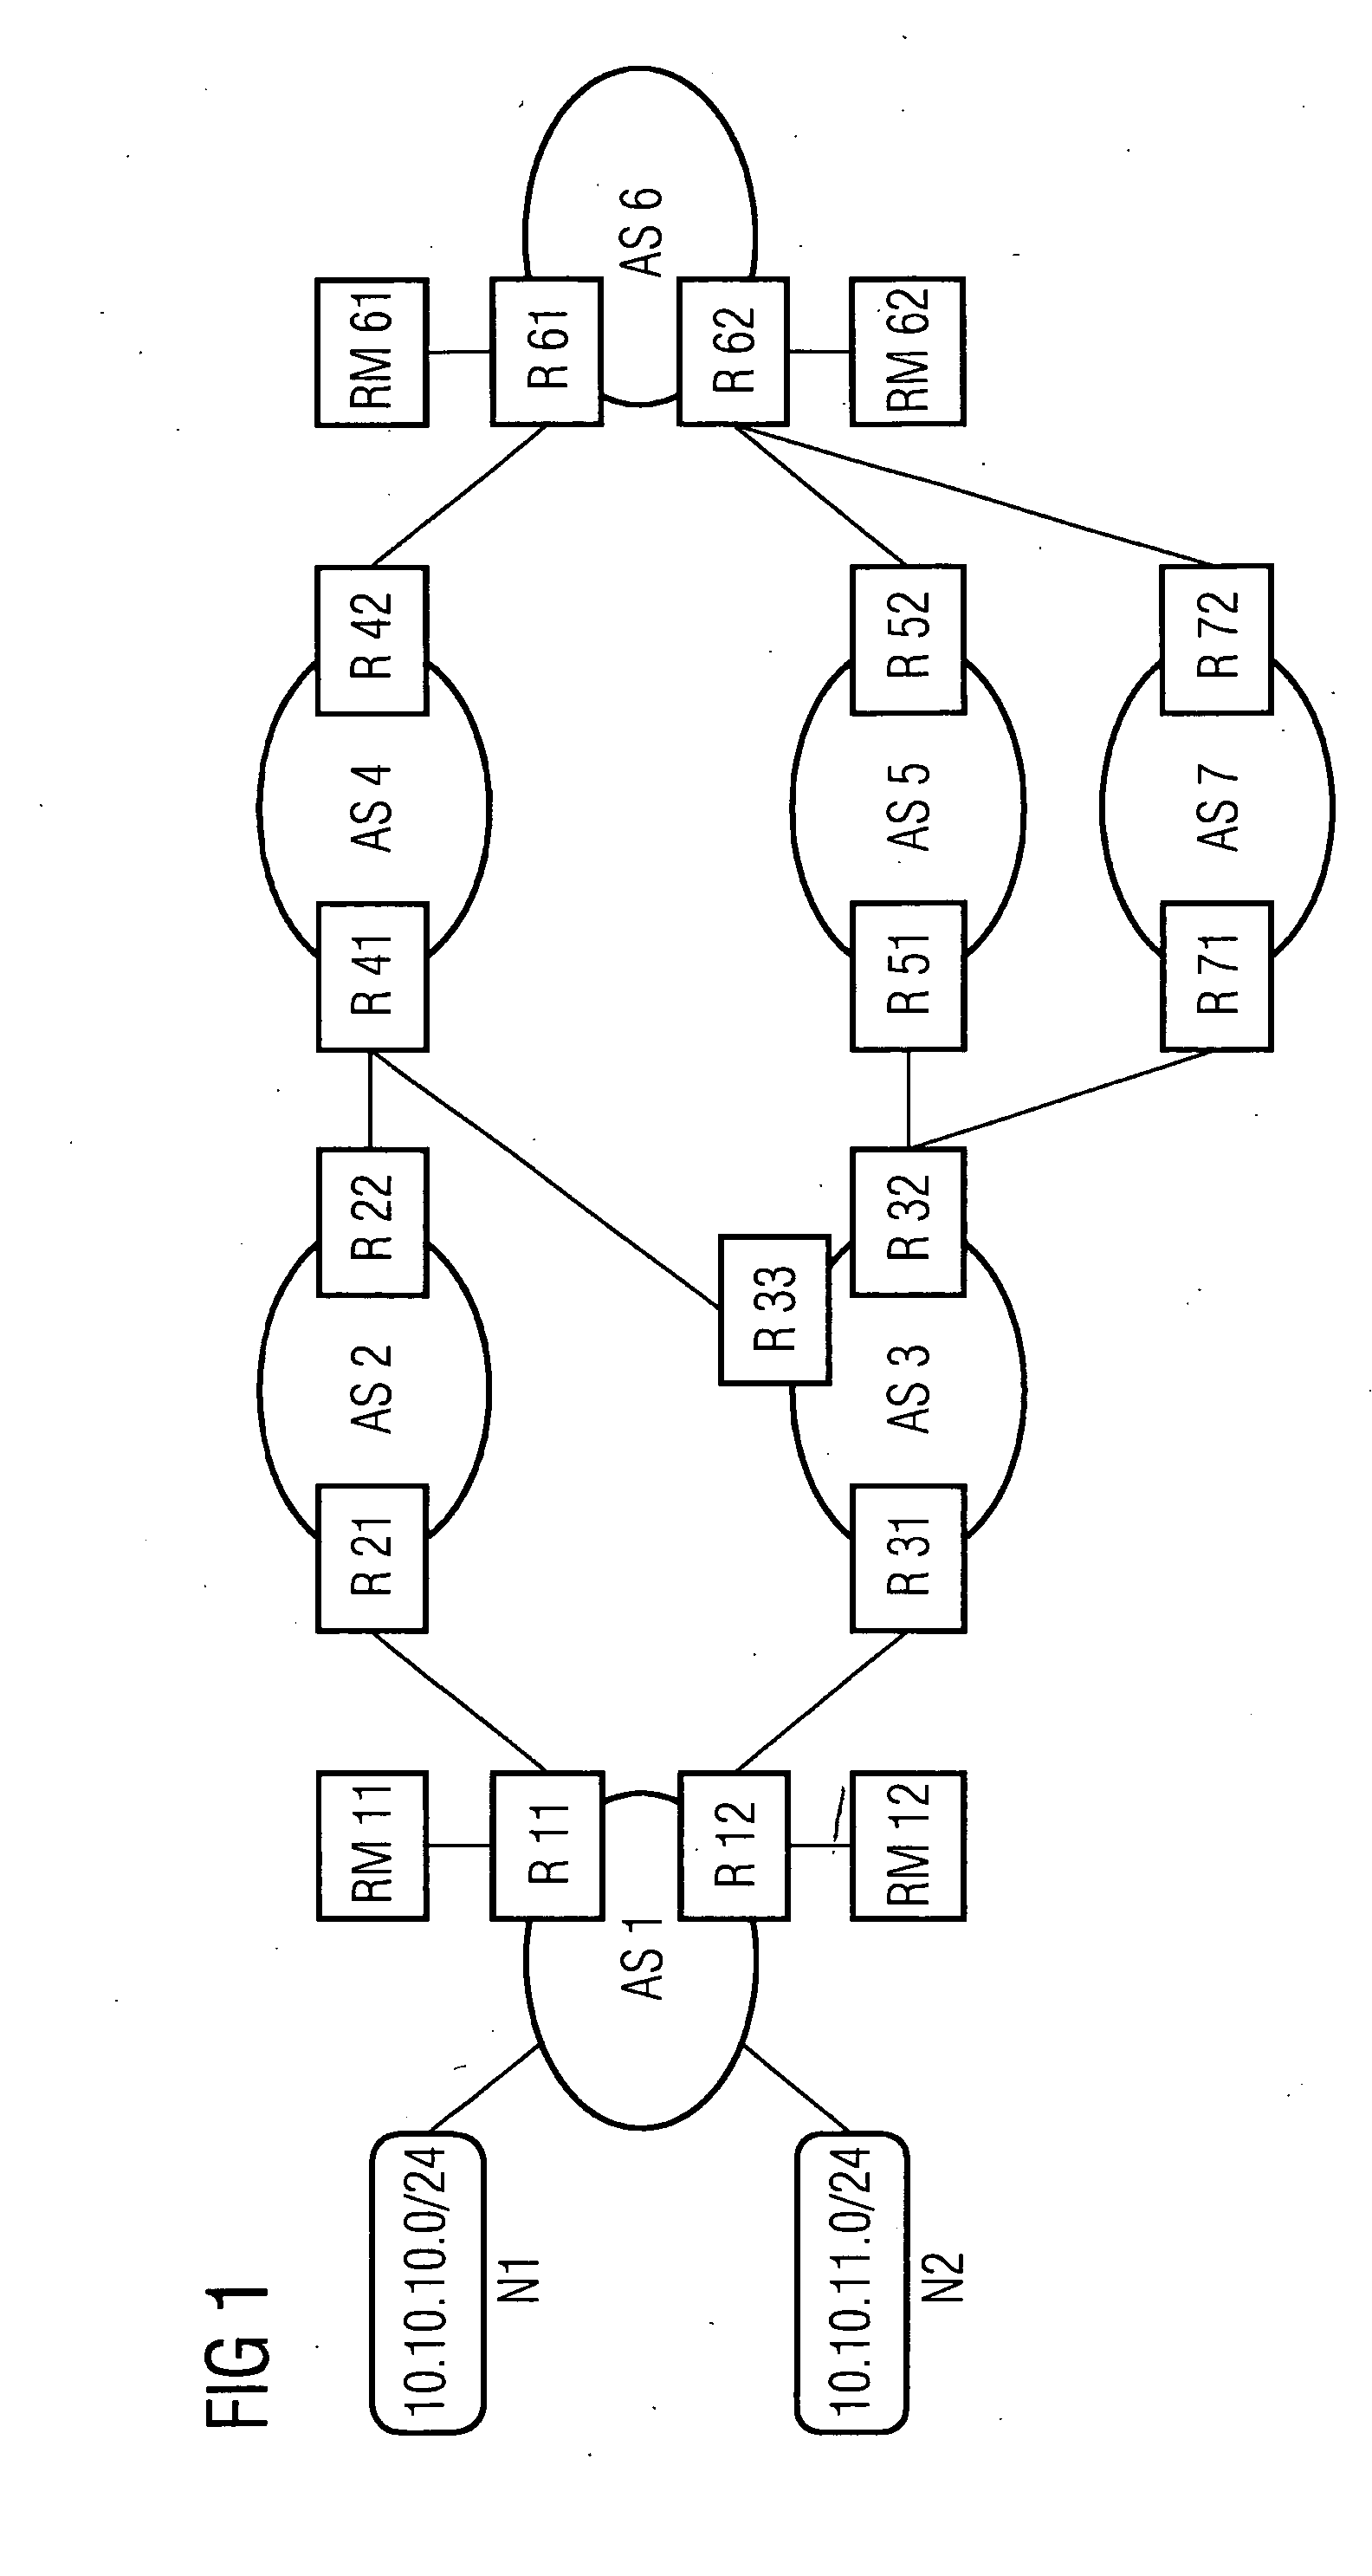 Method and Network Element for Rerouting Traffic, While Maintaining the Quality of Service, in Networks with Slow Route Convergence